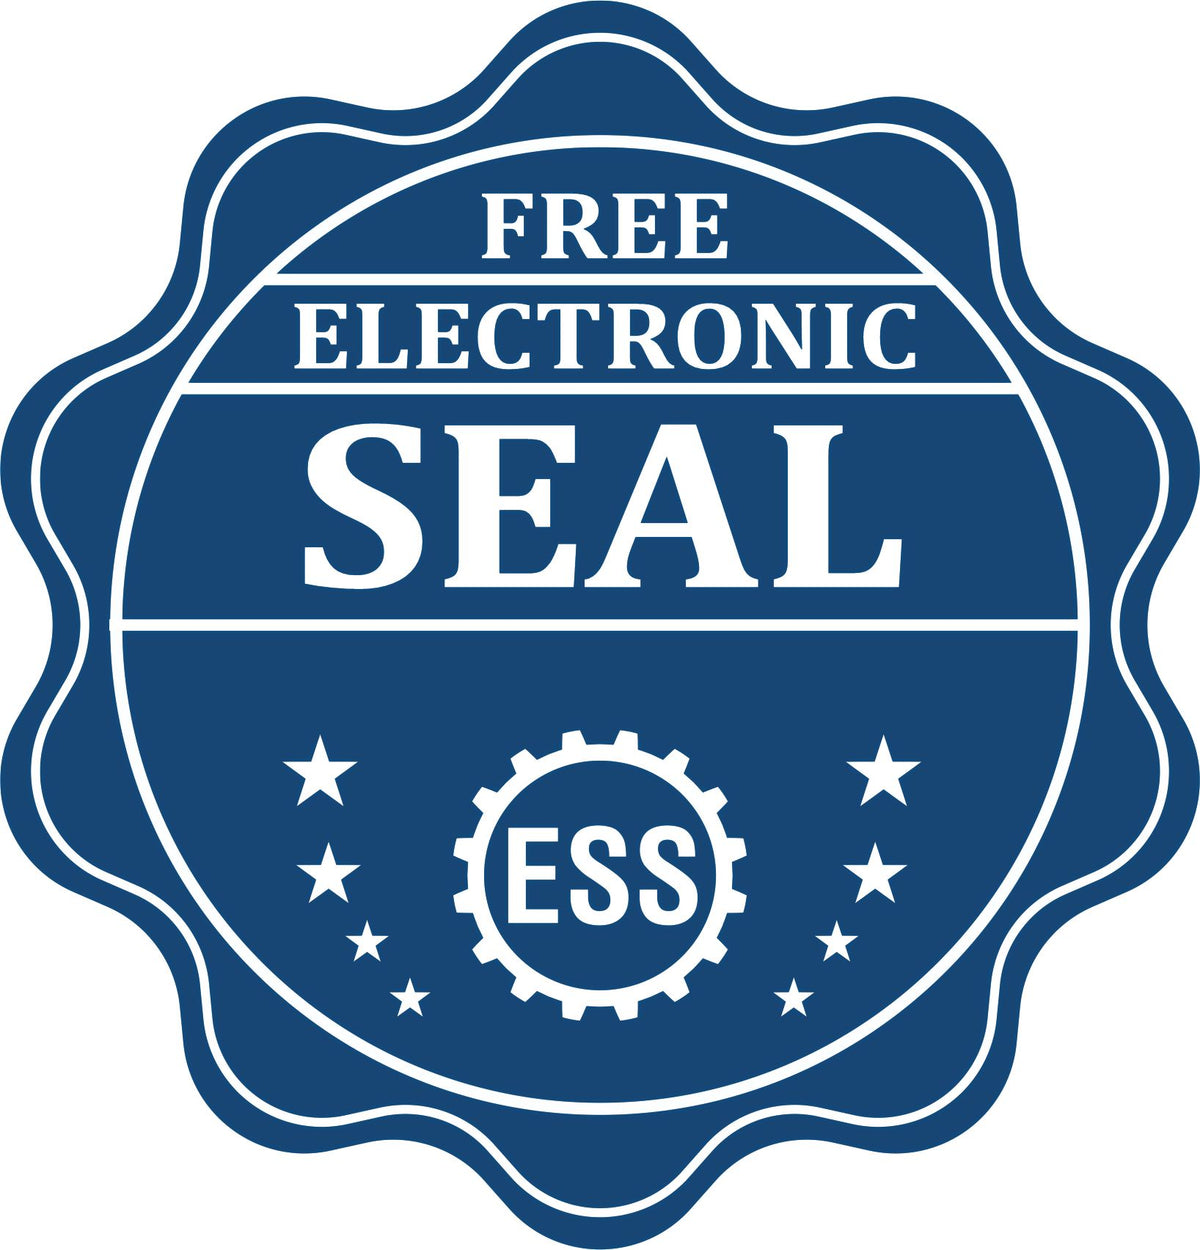 A badge showing a free electronic seal for the Hybrid Texas Architect Seal with stars and the ESS gear on the emblem.